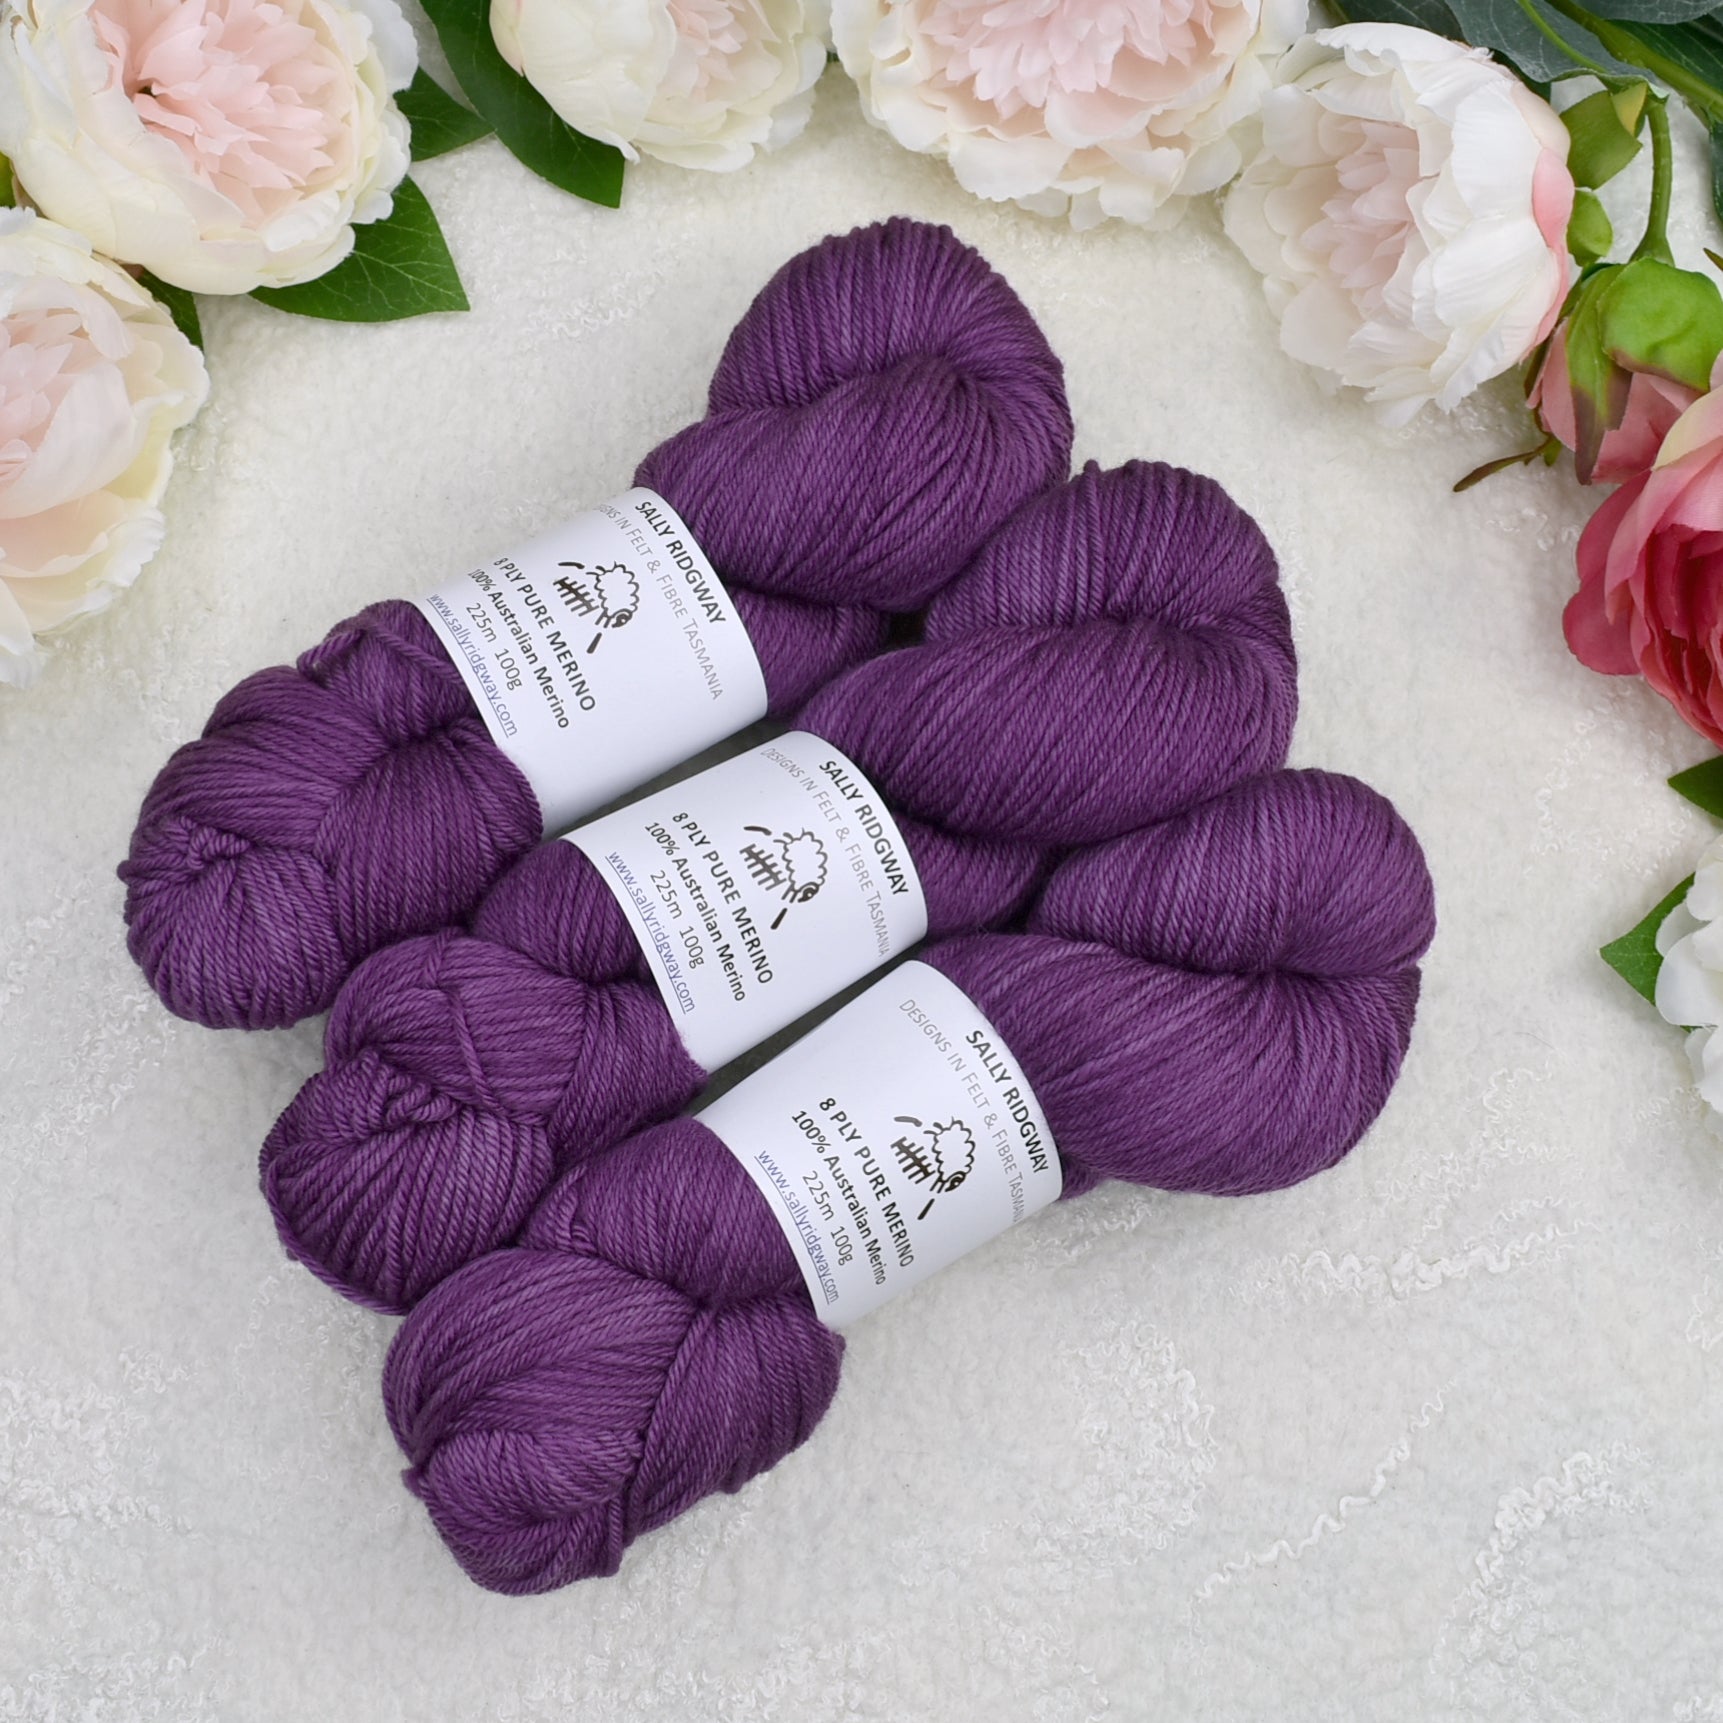 8 Ply Pure Merino Wool Yarn Hand Dyed in Raspberry| 8 ply Pure Merino Yarn | Sally Ridgway | Shop Wool, Felt and Fibre Online